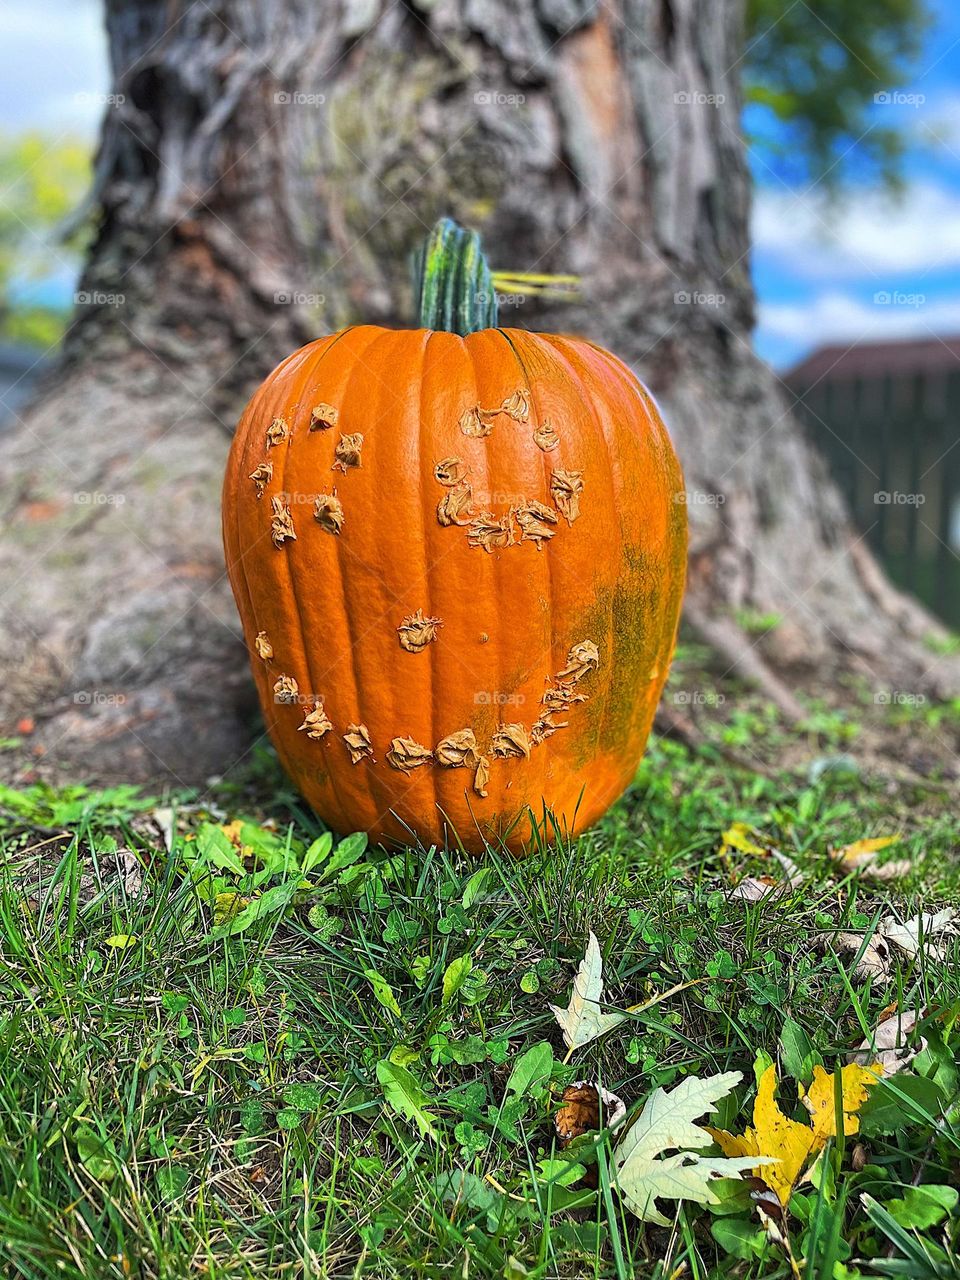 Pumpkin with peanut butter face, making jack o lanterns with kids, making a squirrel feeder with a pumpkin, pumpkins for Halloween, carving pumpkins with a drill and peanut butter, creative ways to carve pumpkins 